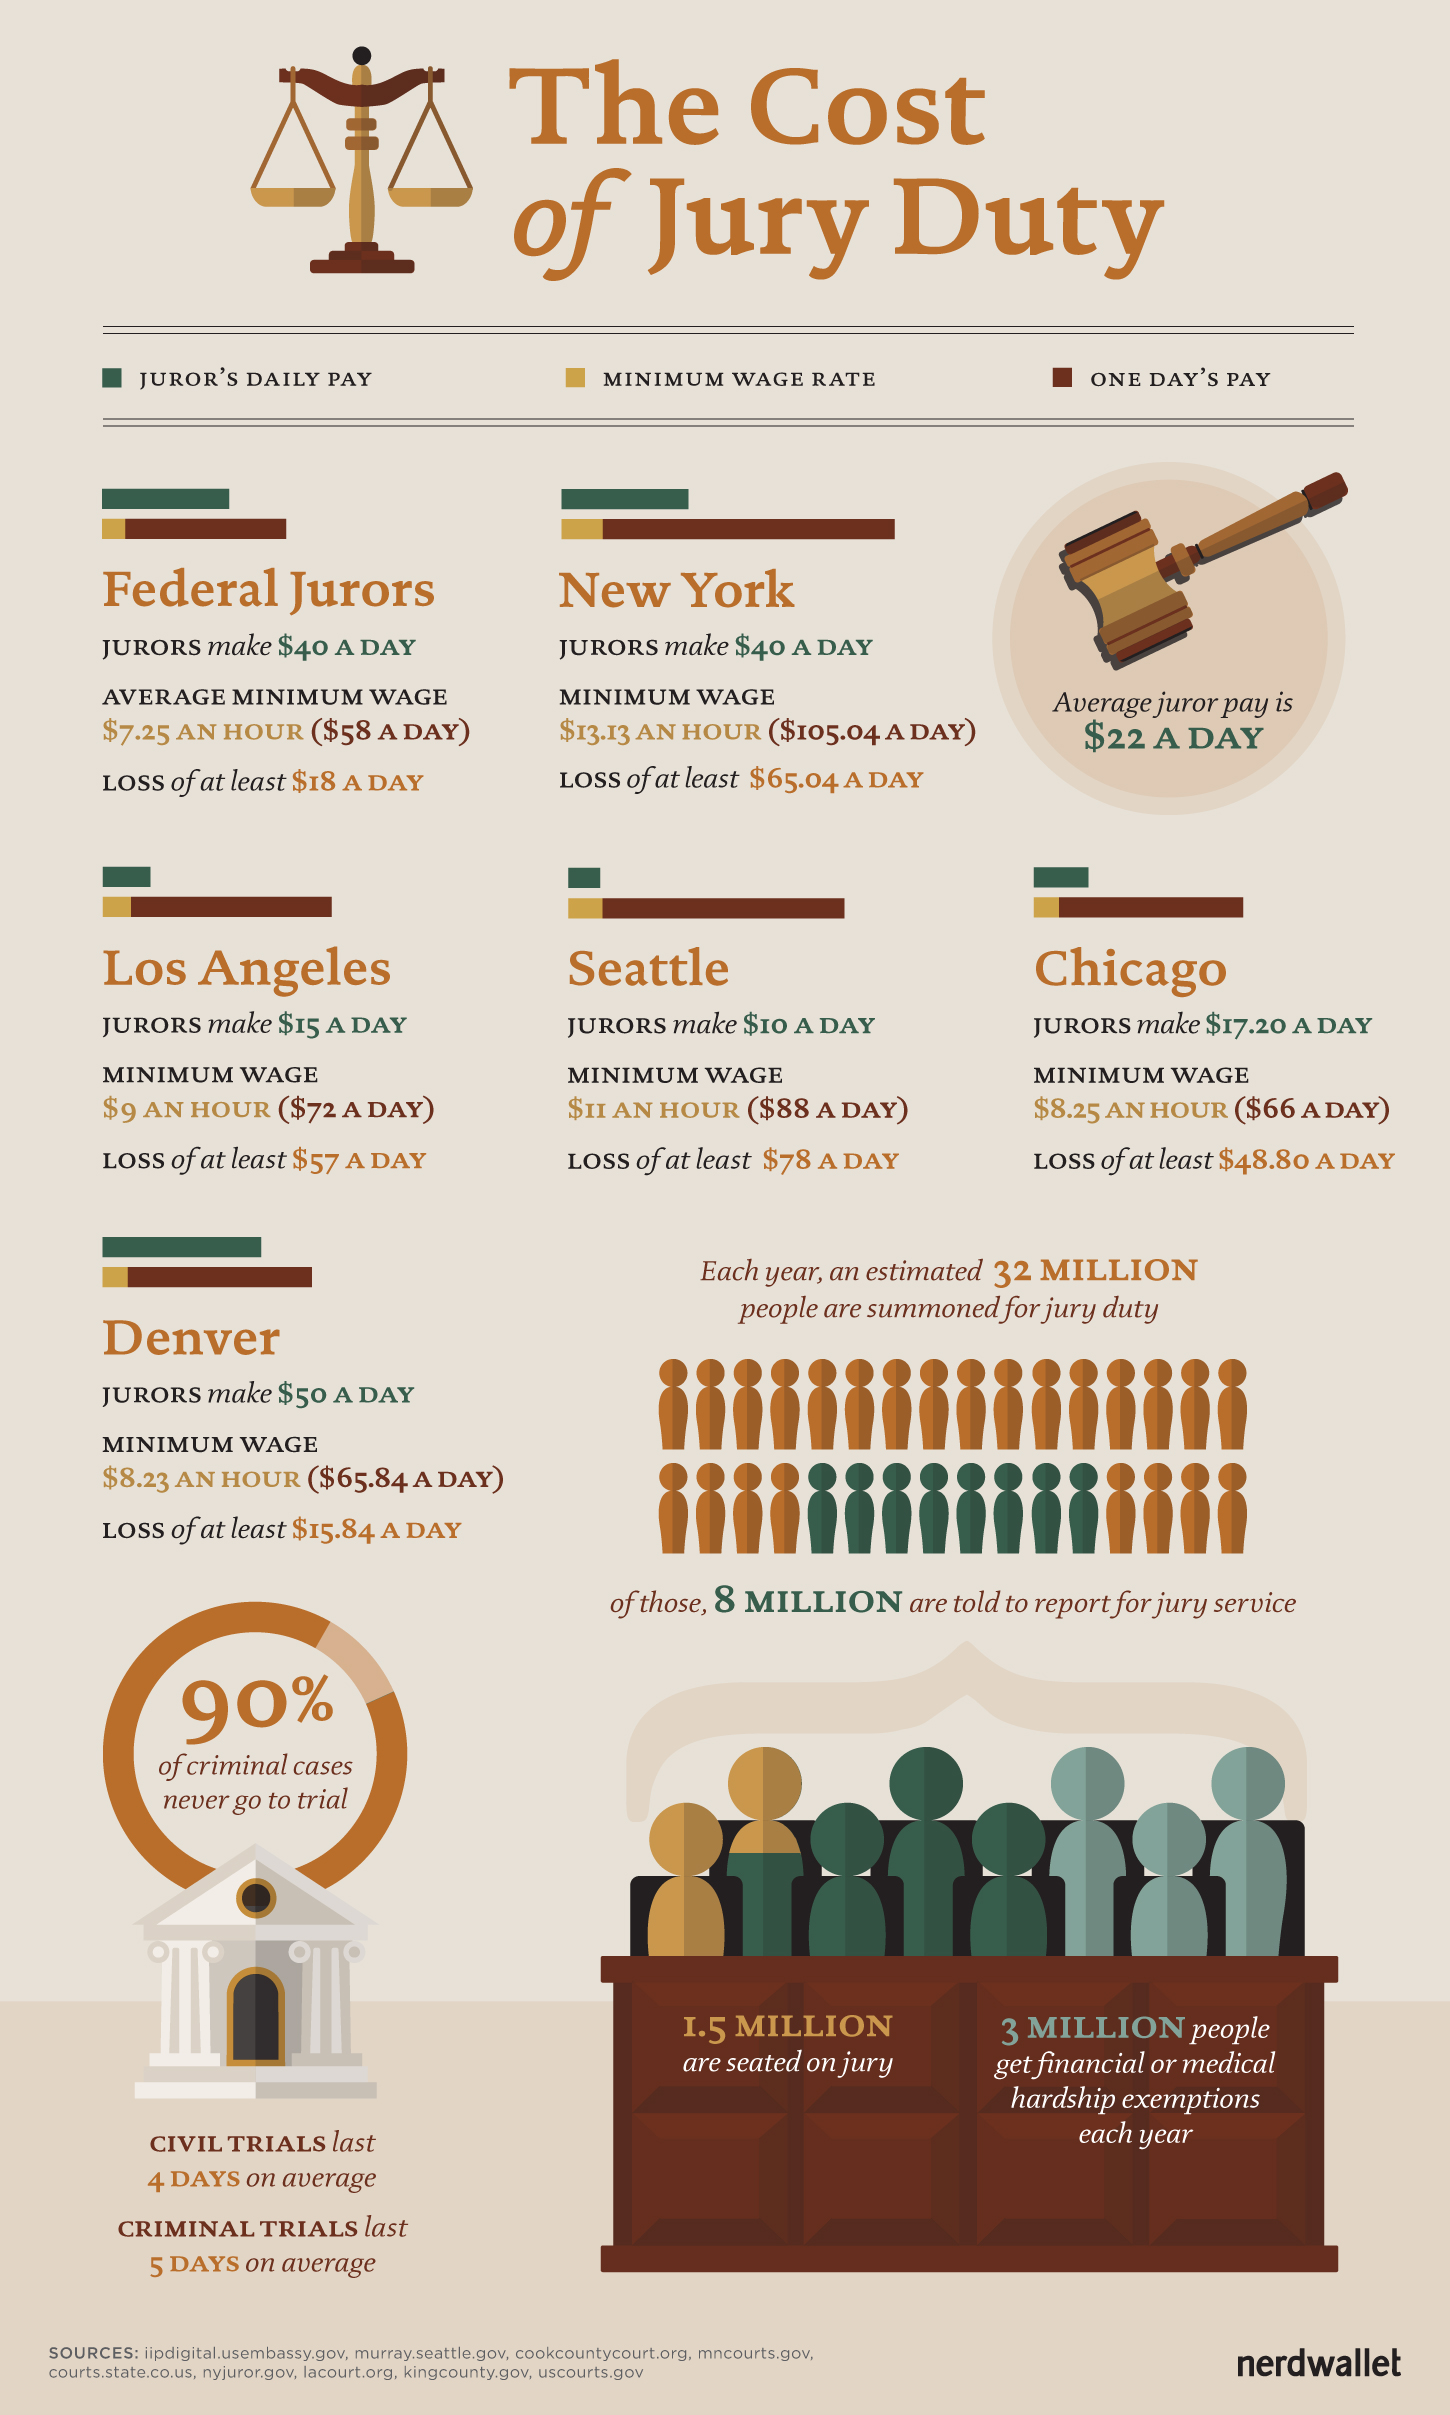 The Cost of Jury Duty